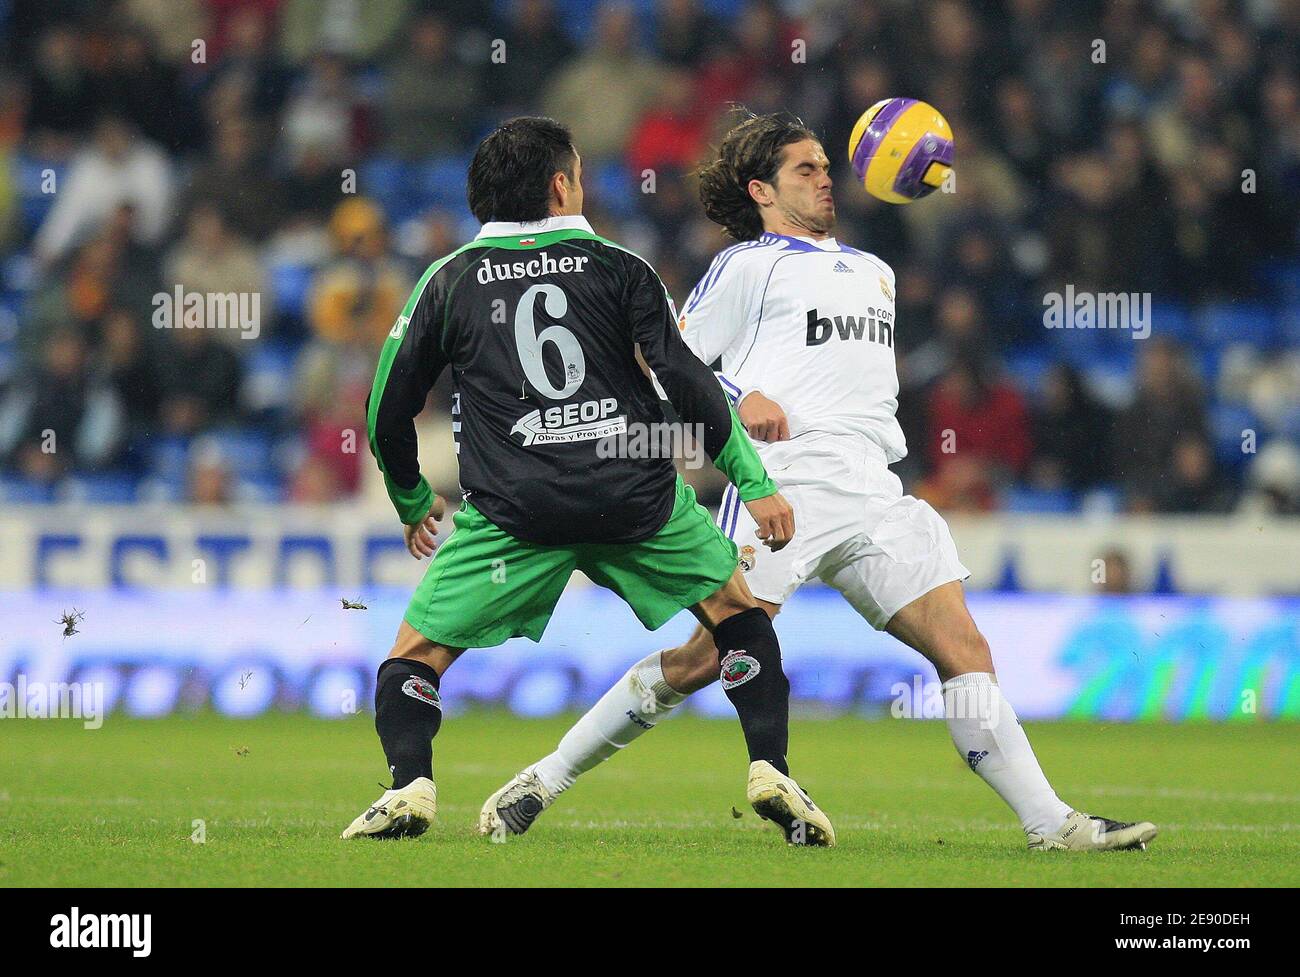 Real Madrid's Fernando Gago heads the ball during the Spanish League soccer match between Real Madrid and Racing Santander at the Santiago Bernabeu Stadium in Madrid, Spain on December 1, 2007. Real won 3-1. Photo by Christian Liewig/ABACAPRESS.COM Stock Photo